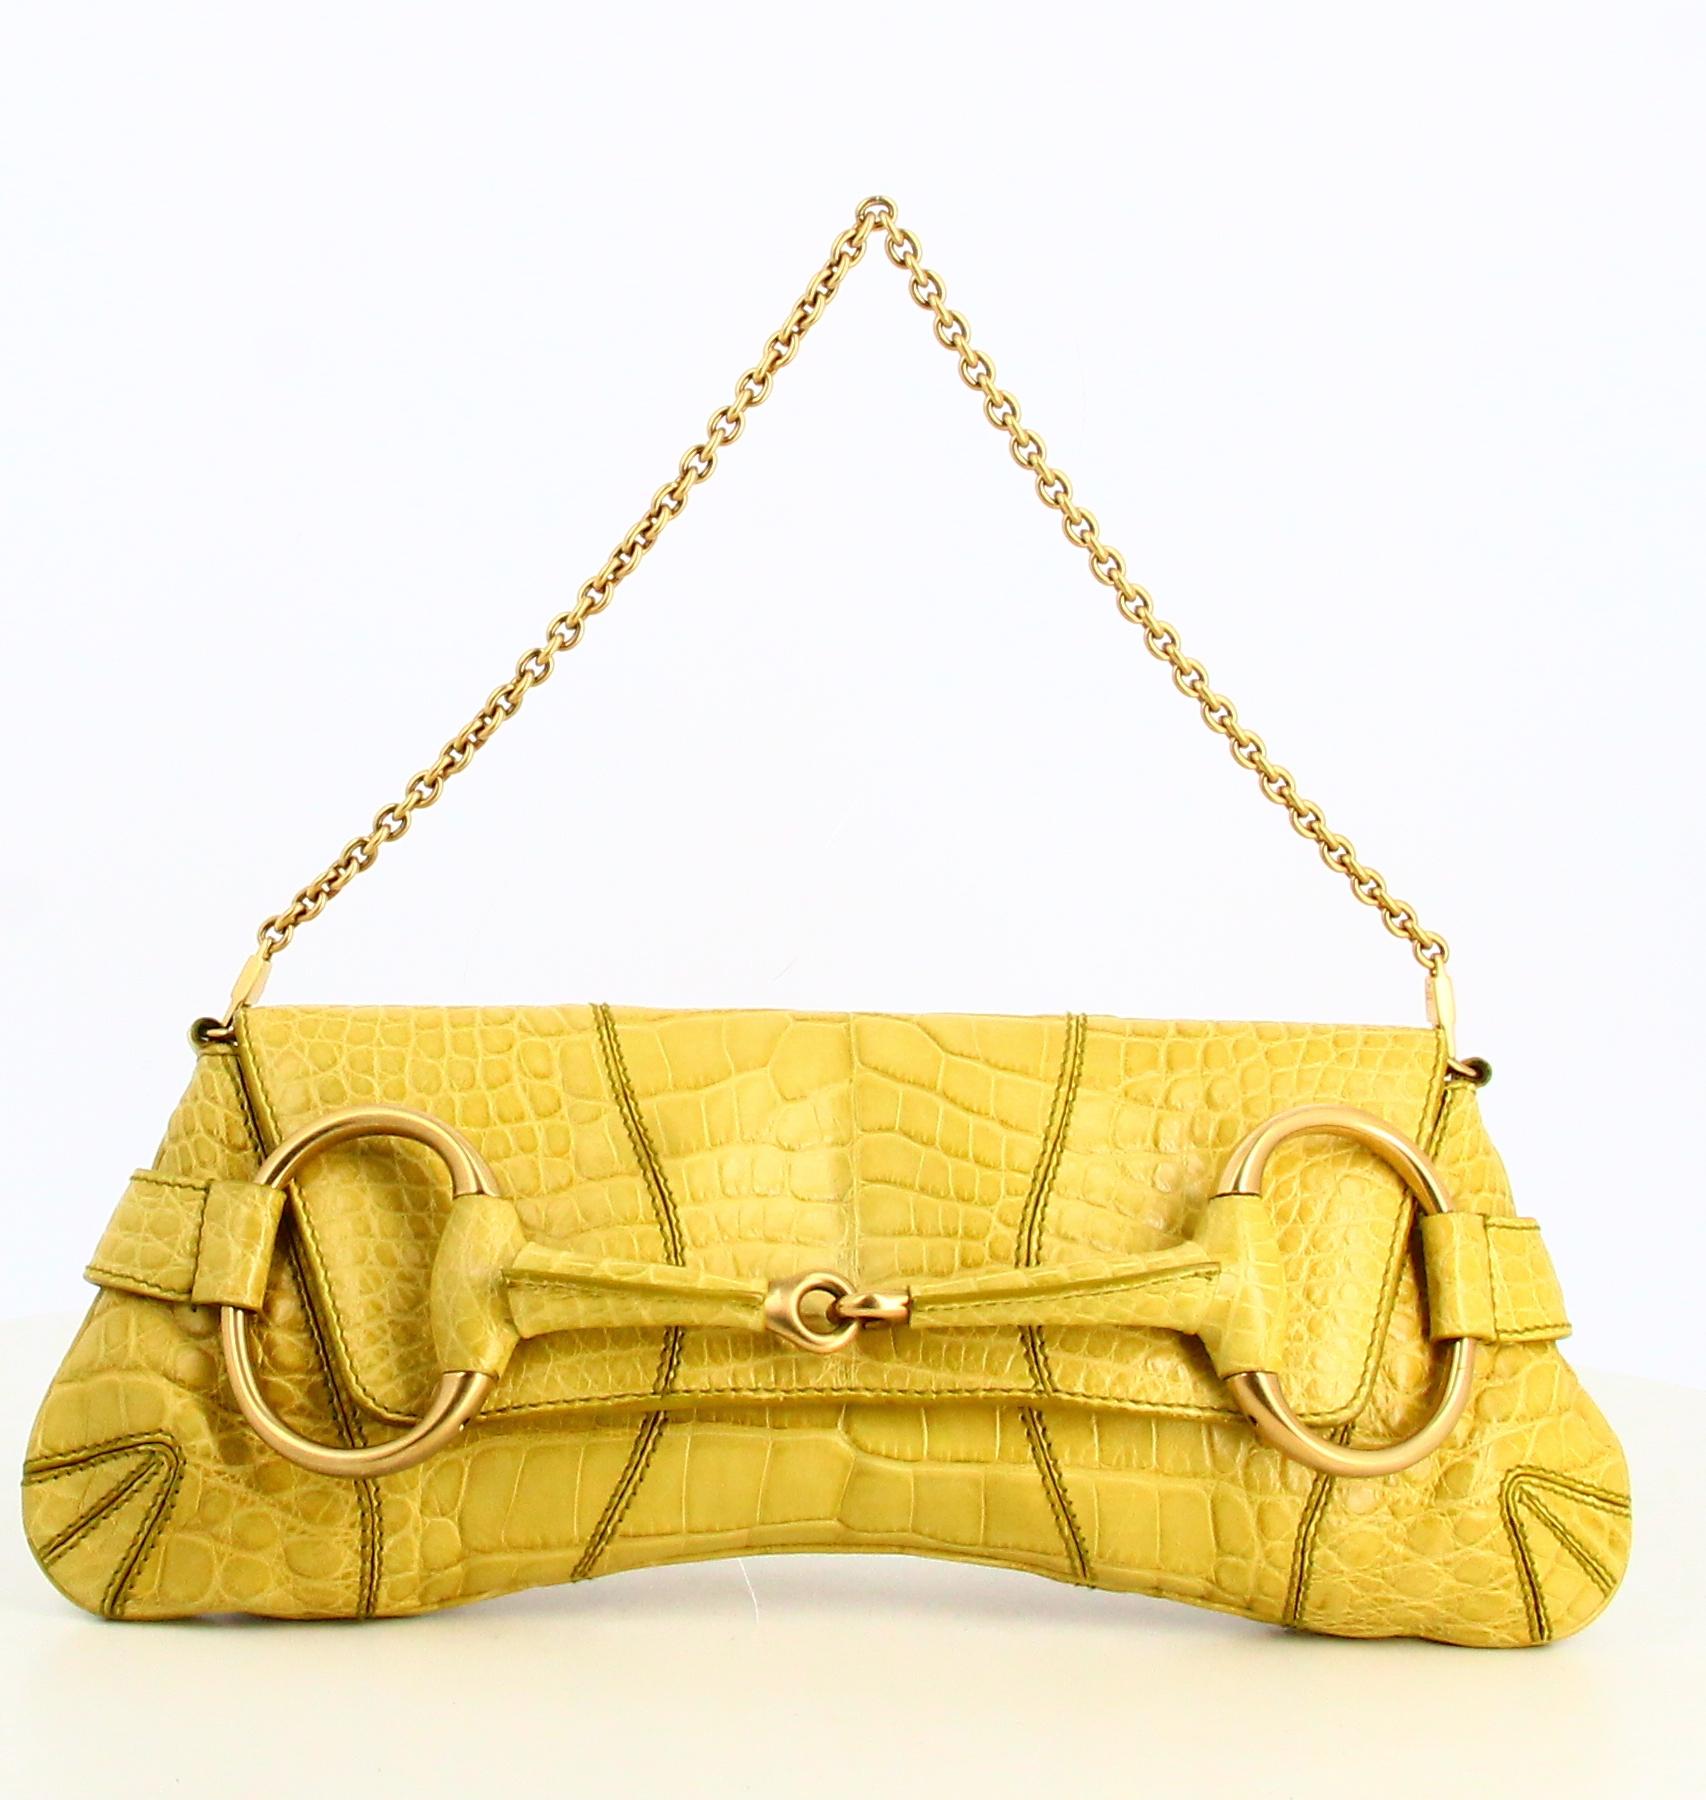 2000's Gucci Horsebit Chain Crocodile Shoulder Bag Yellow 

- Good condition. shows very slight signs of wear over time.
- Gucci Shoulder Bag
- Crocodile
- Golden Chain 
- Inside: Leather plus a small inside pocket